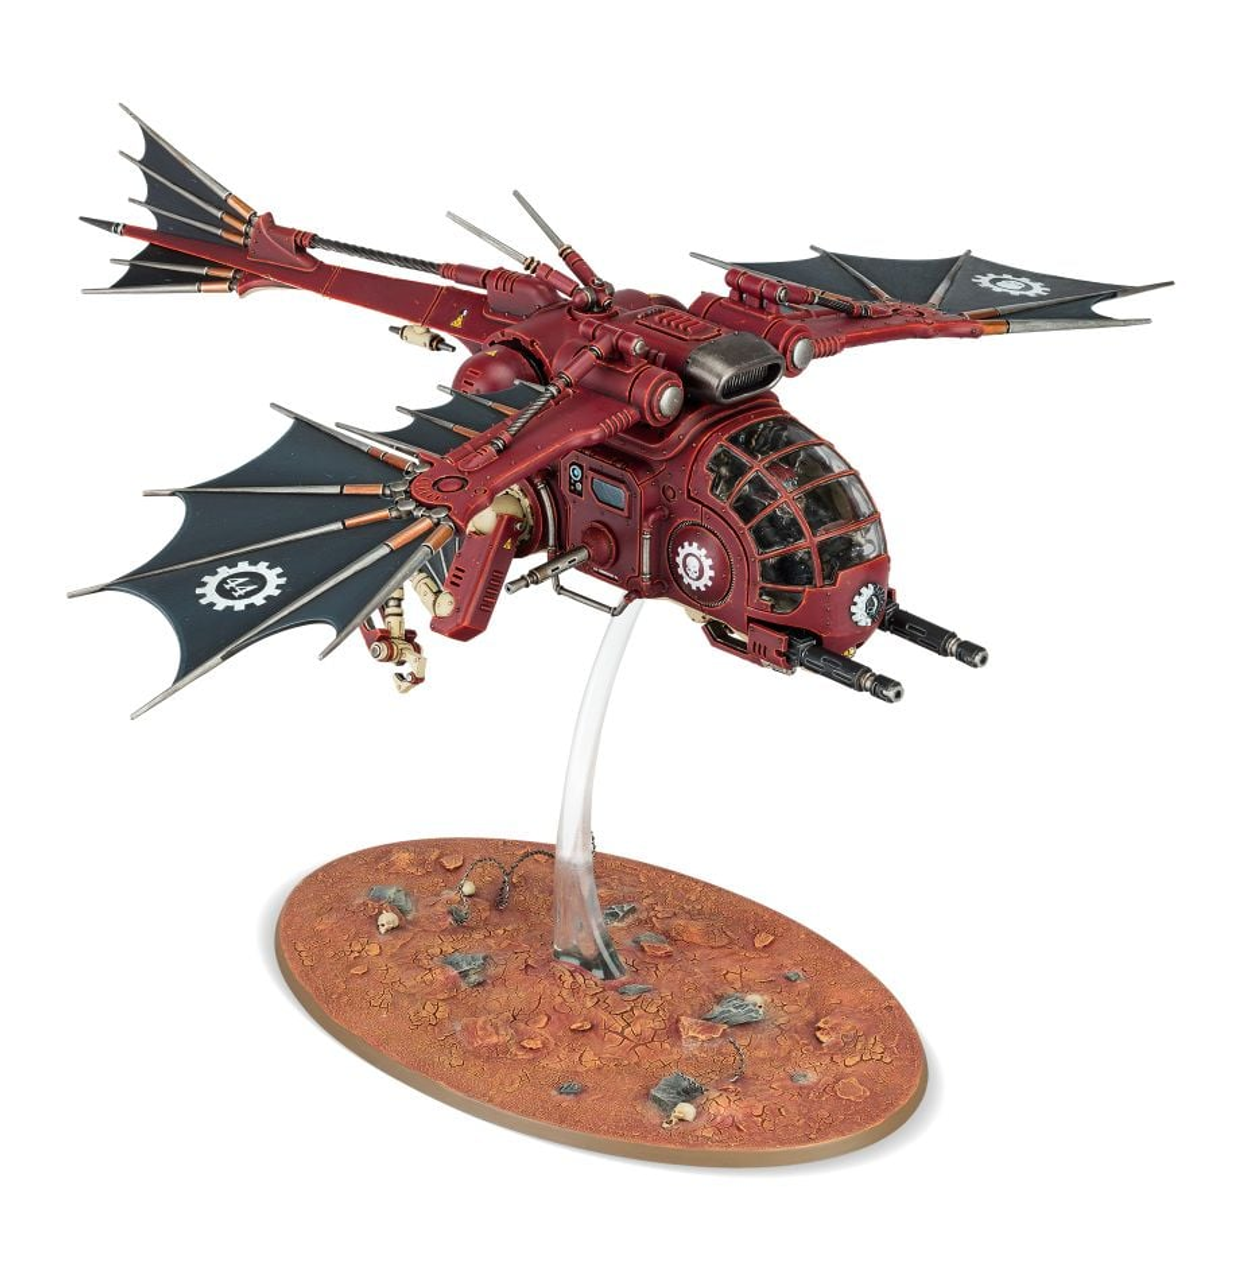 Adeptus Mechanicus: Archaeopter - Loaded Dice Barry Vale of Glamorgan CF64 3HD